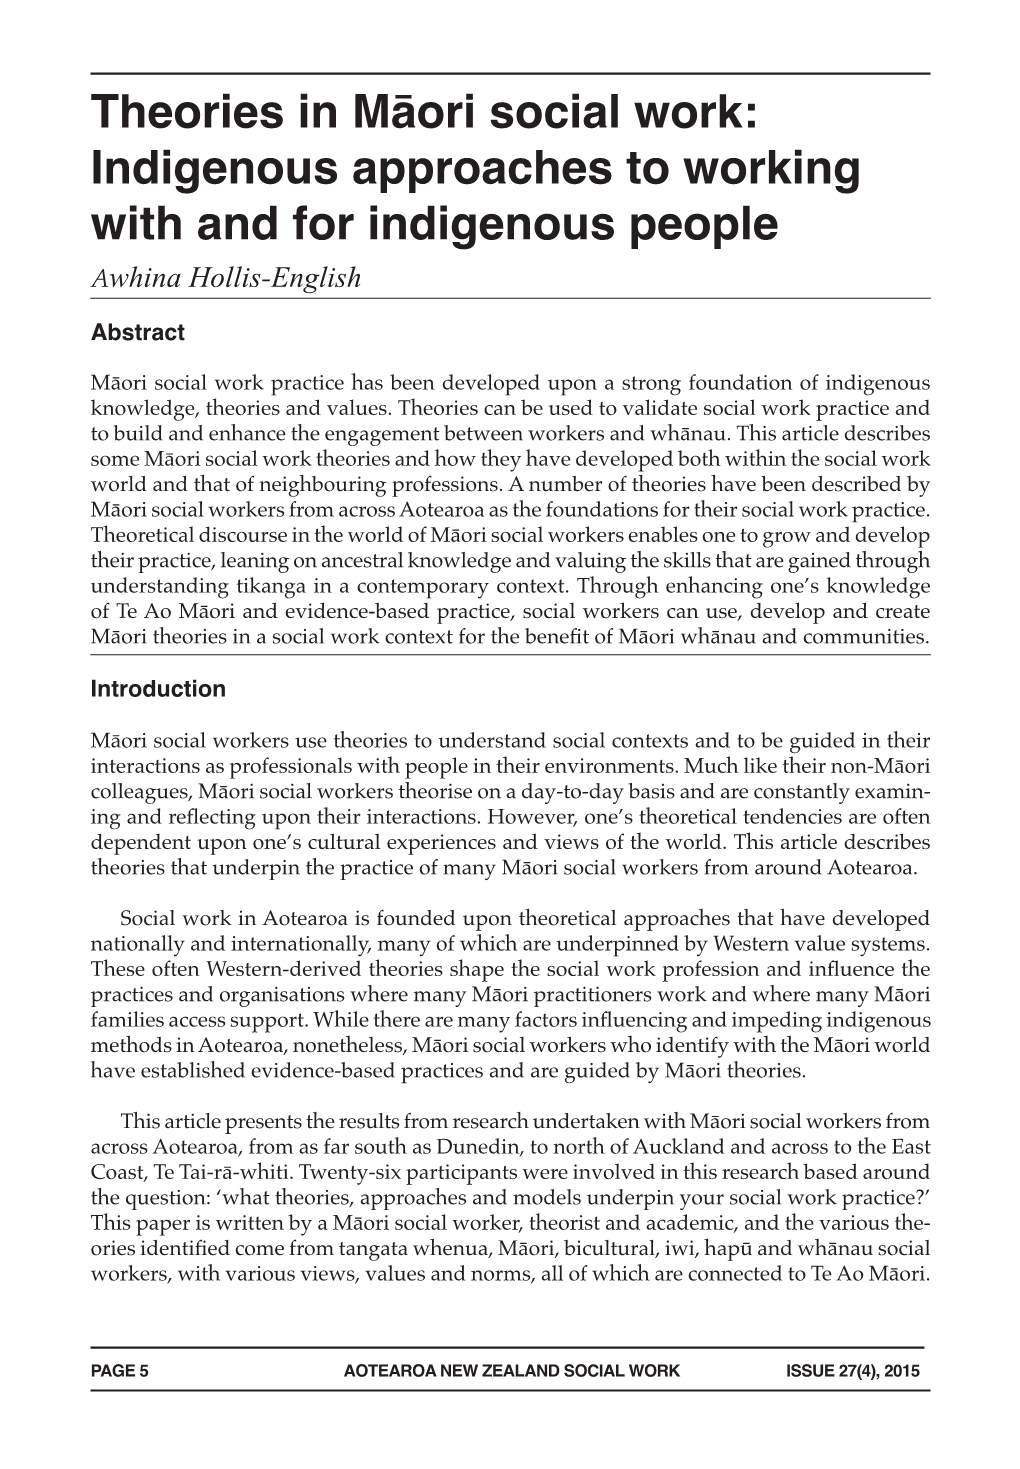 Theories in Māori Social Work: Indigenous Approaches to Working with and for Indigenous People Awhina Hollis-English